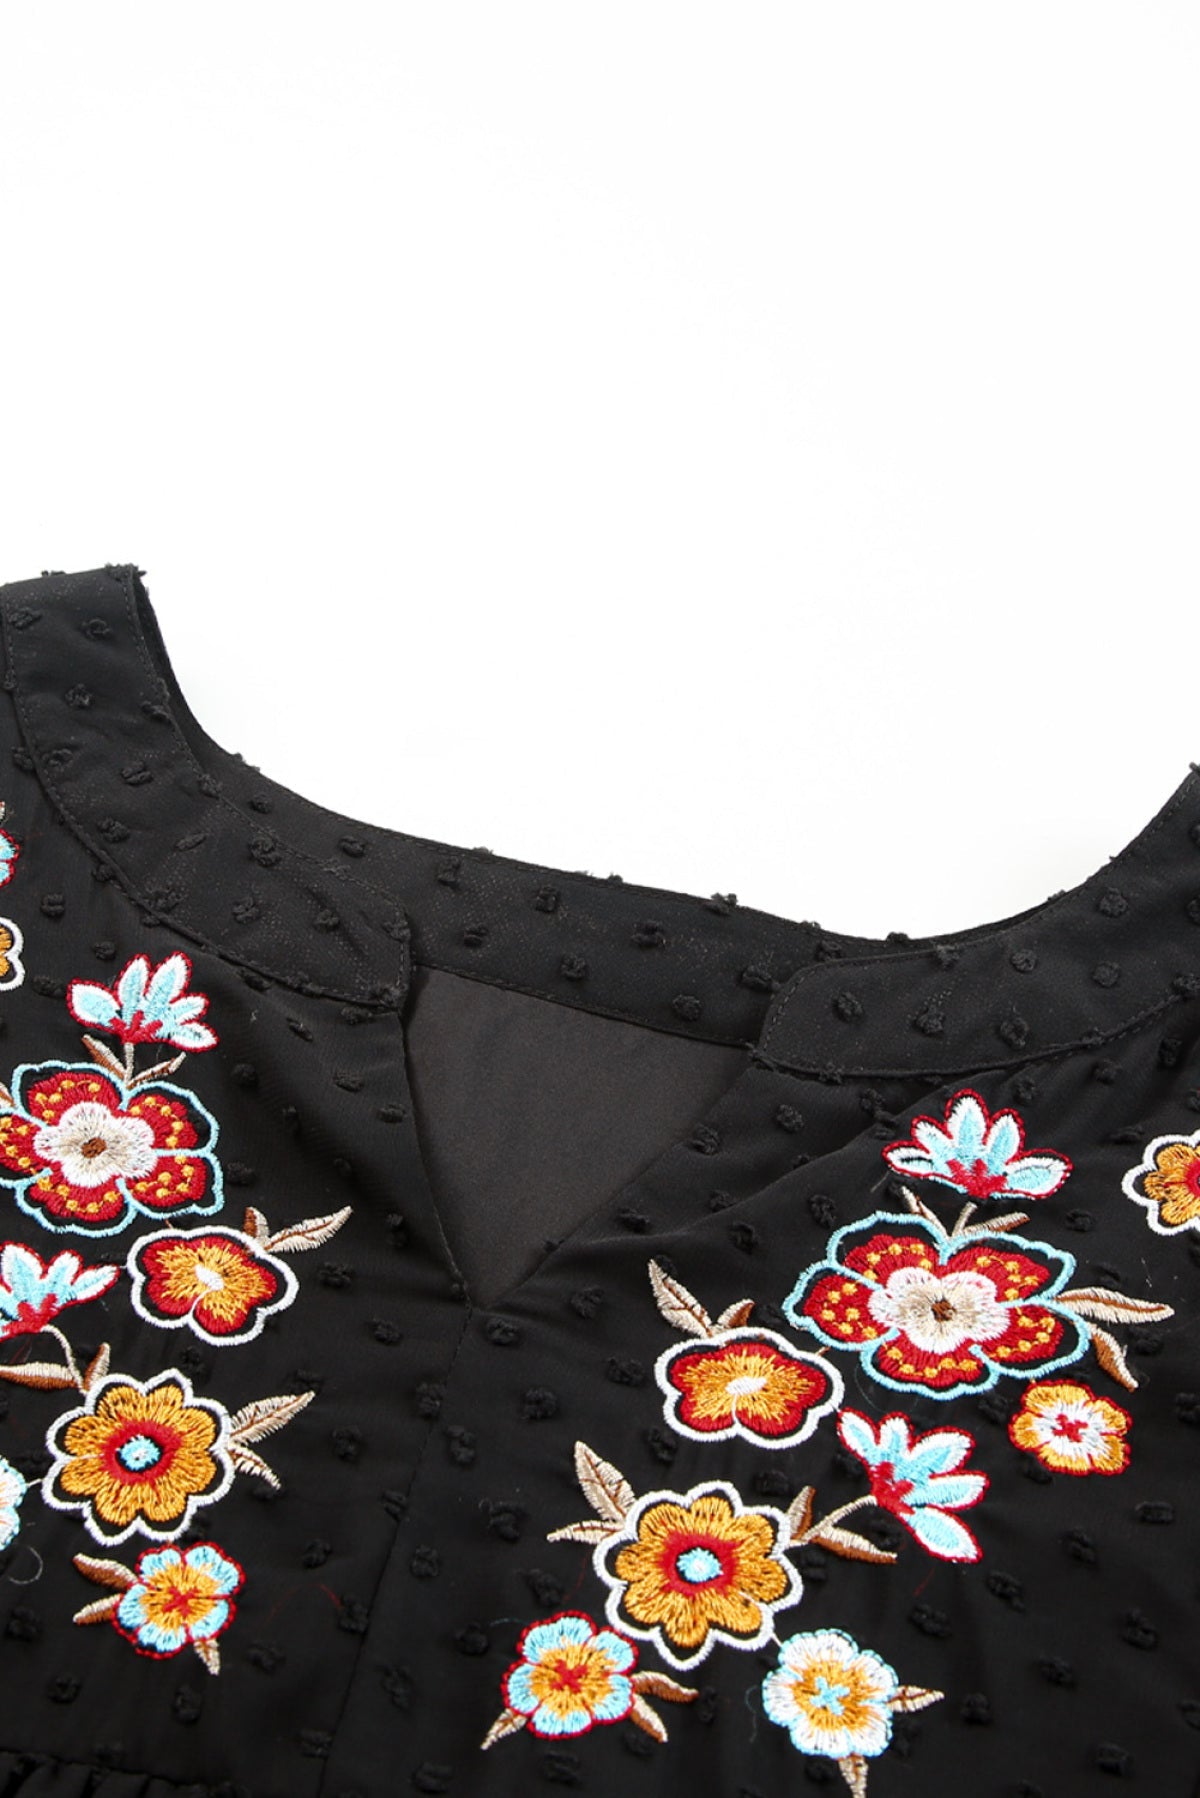 Black Embroidered Swiss Dot Texture Plus Size Blouse